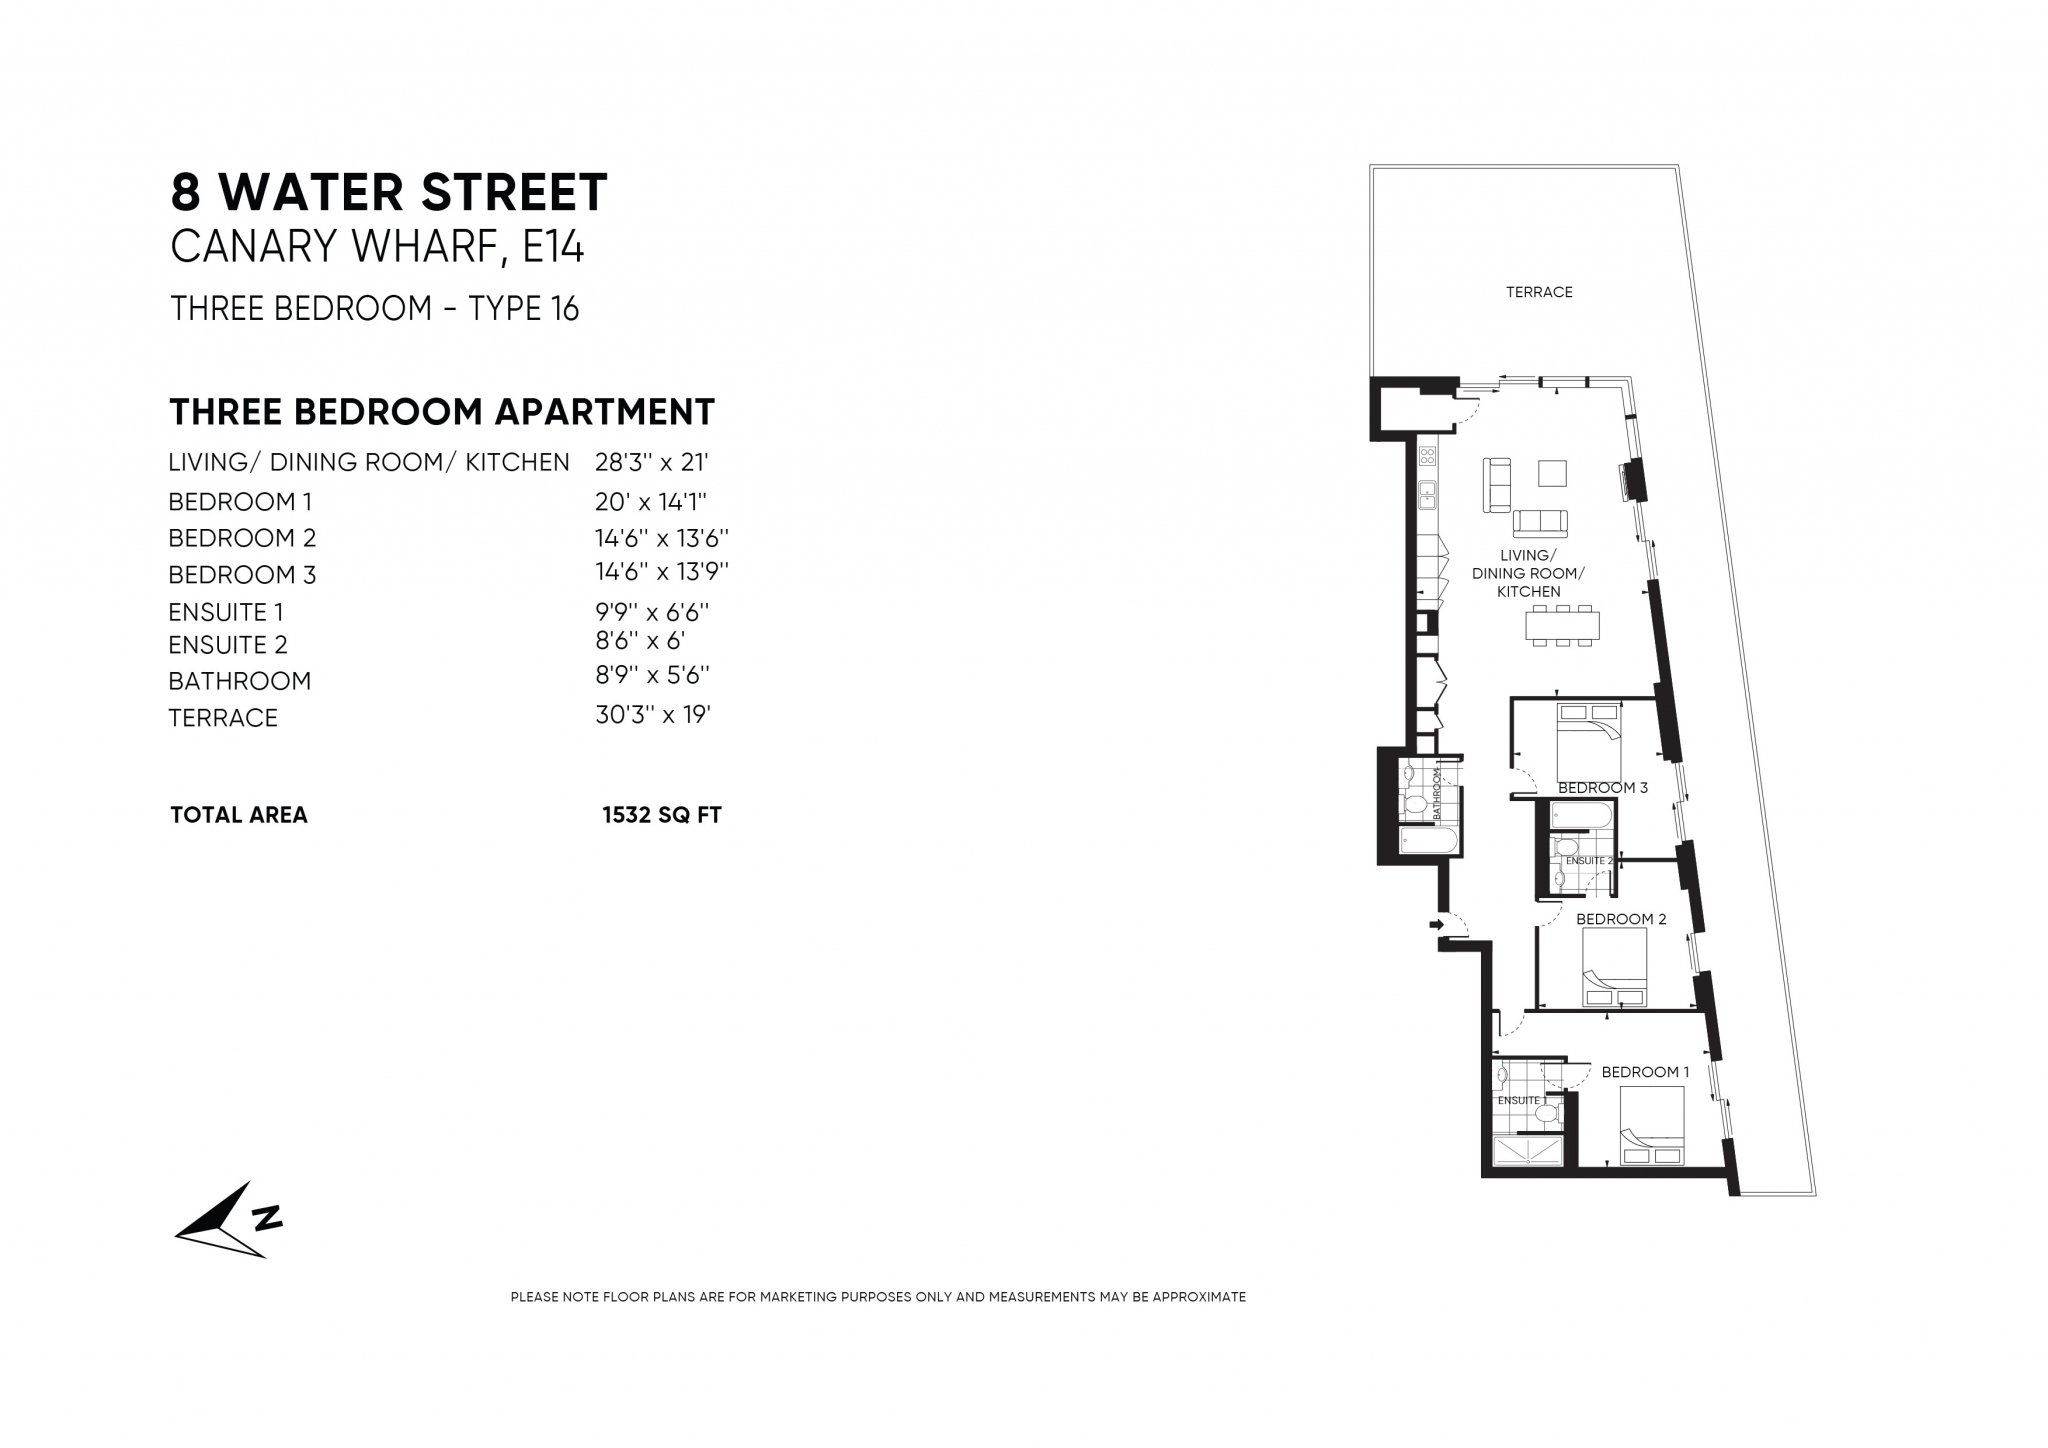 Listing image of 8 Water Street, E14